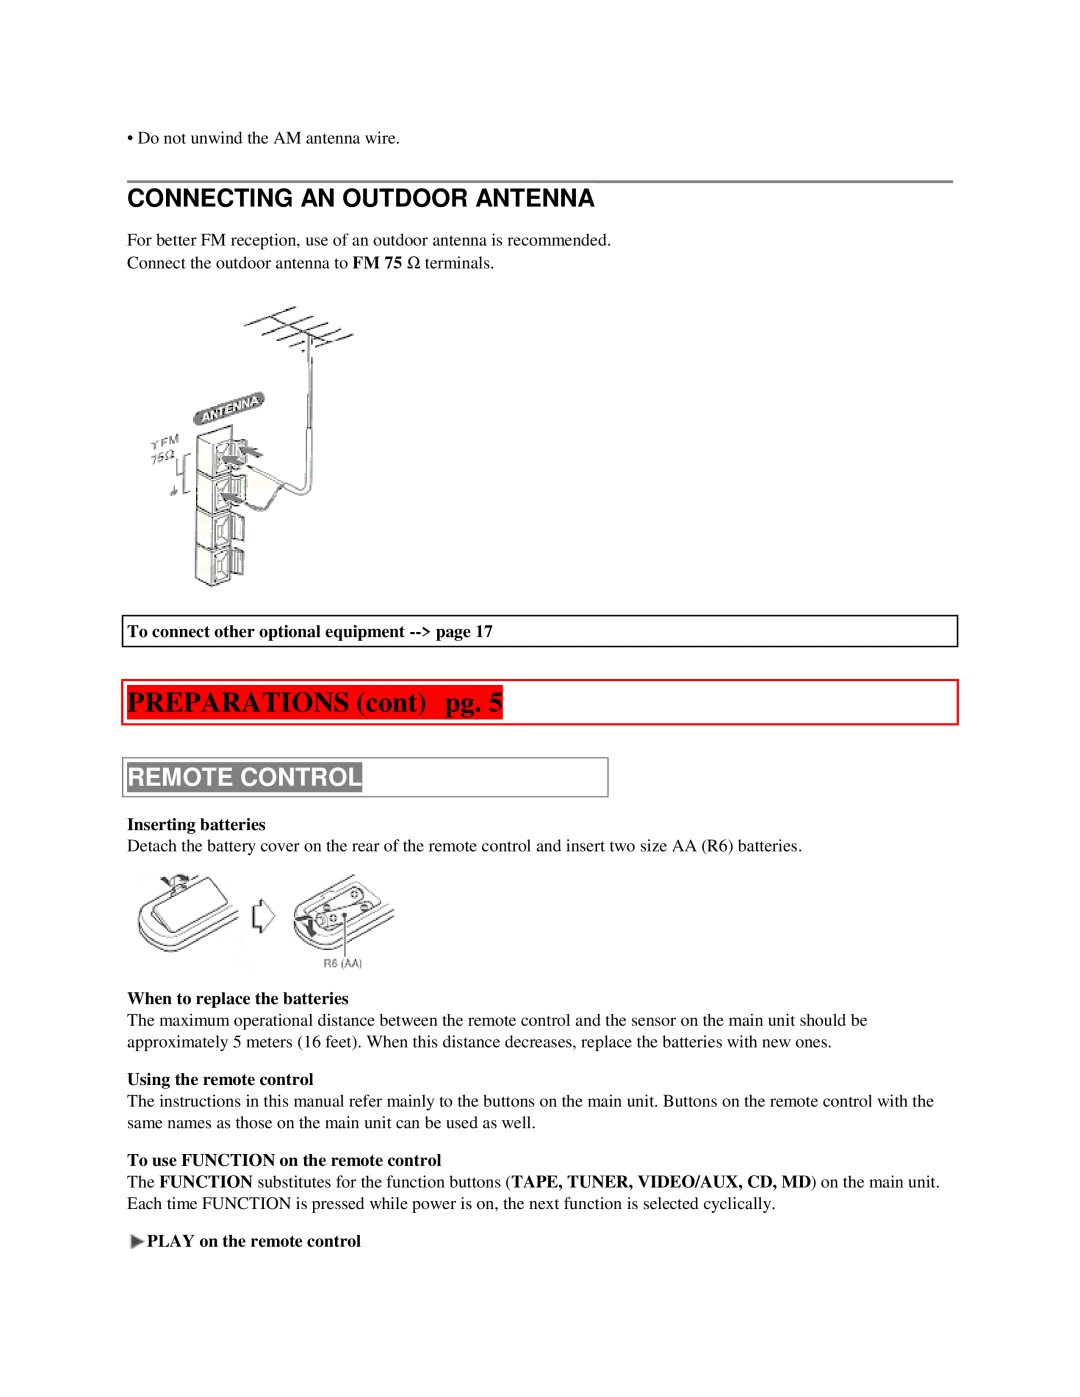 Aiwa XR-M55 Connecting An Outdoor Antenna, Remote Control, To connect other optional equipment -->page 